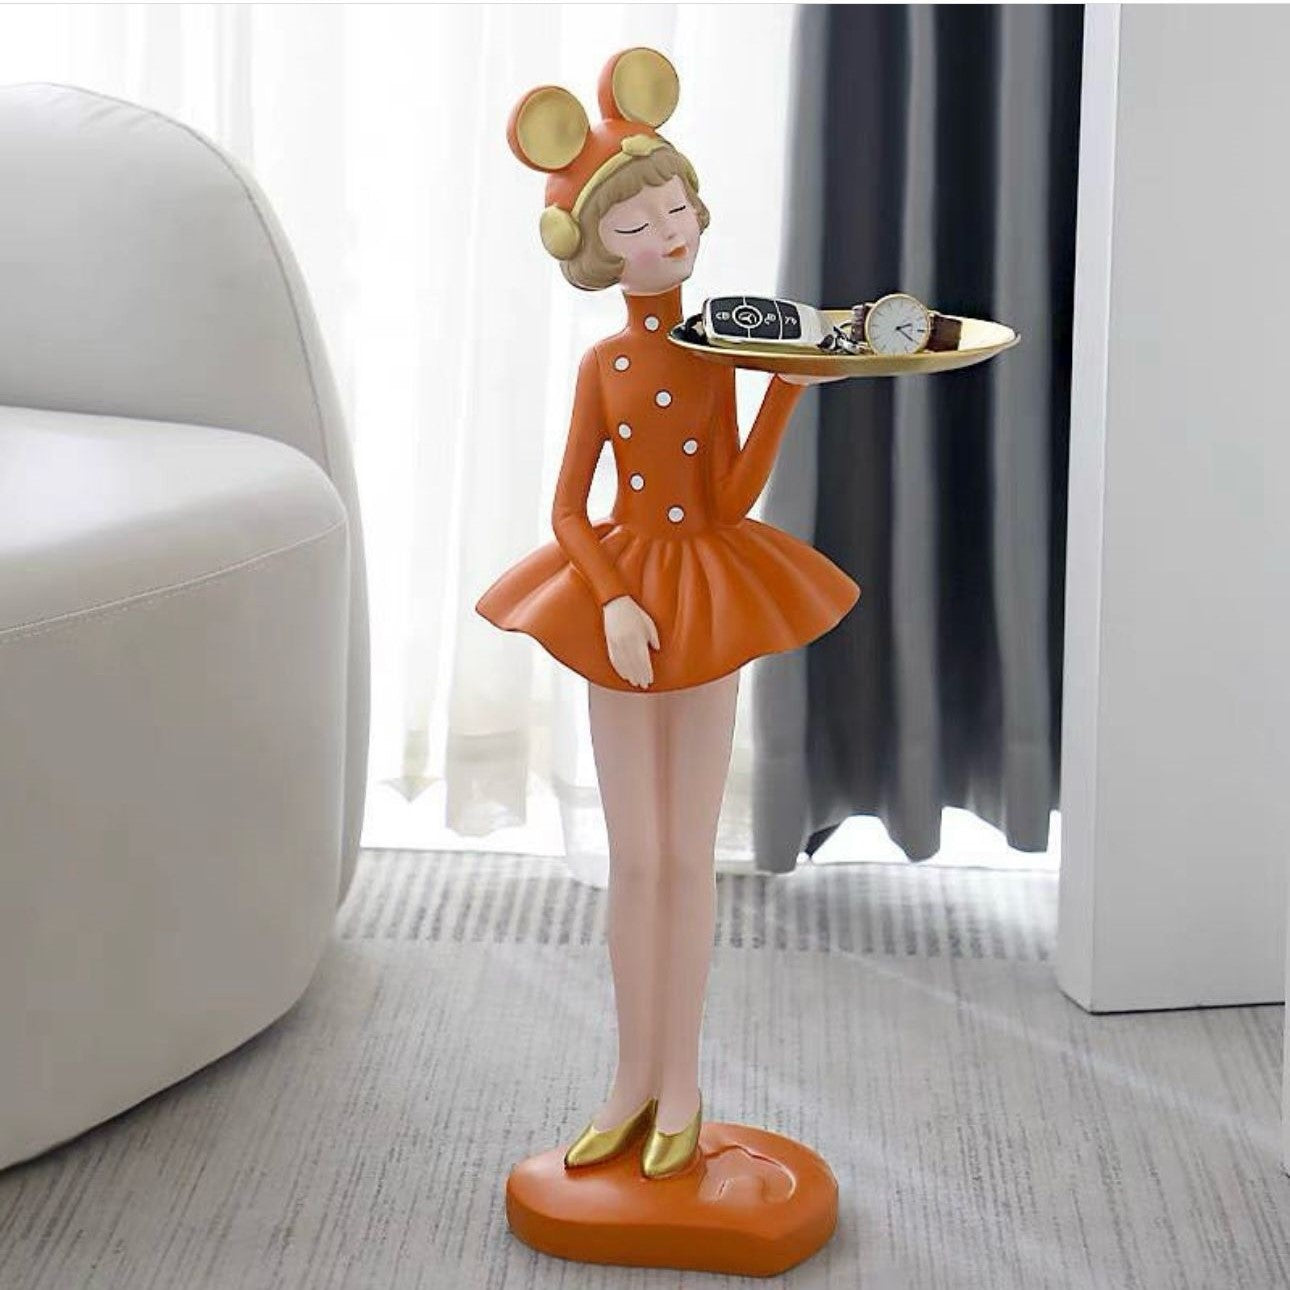 Barbie's Whimsical Serving Tray